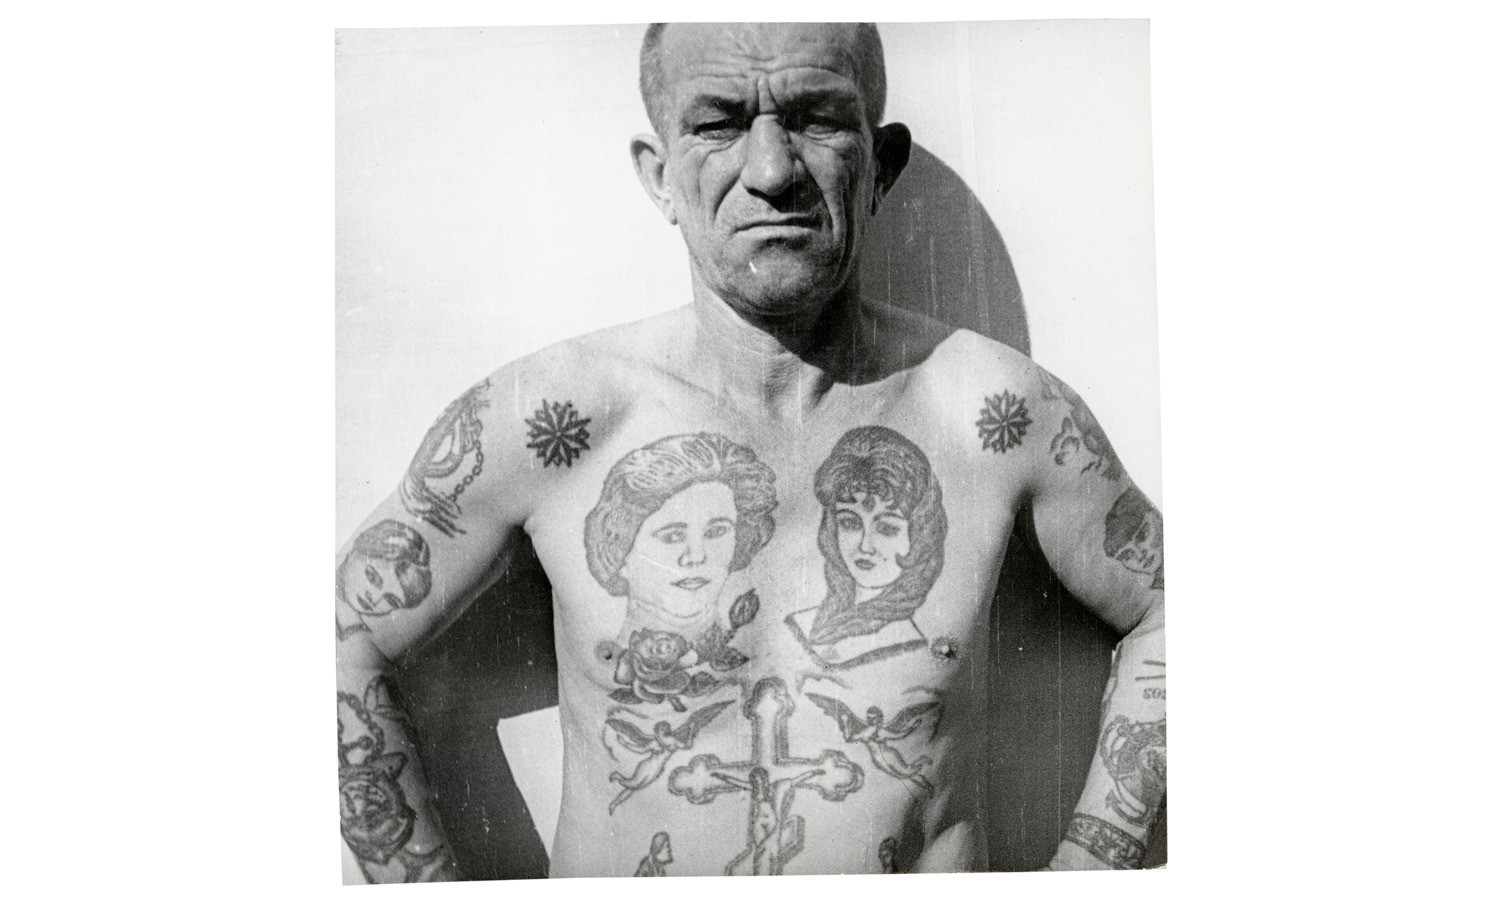 20 Dark and Real Prison Tattoo Designs | Prison tattoos, Face tattoos,  Tattoos with meaning